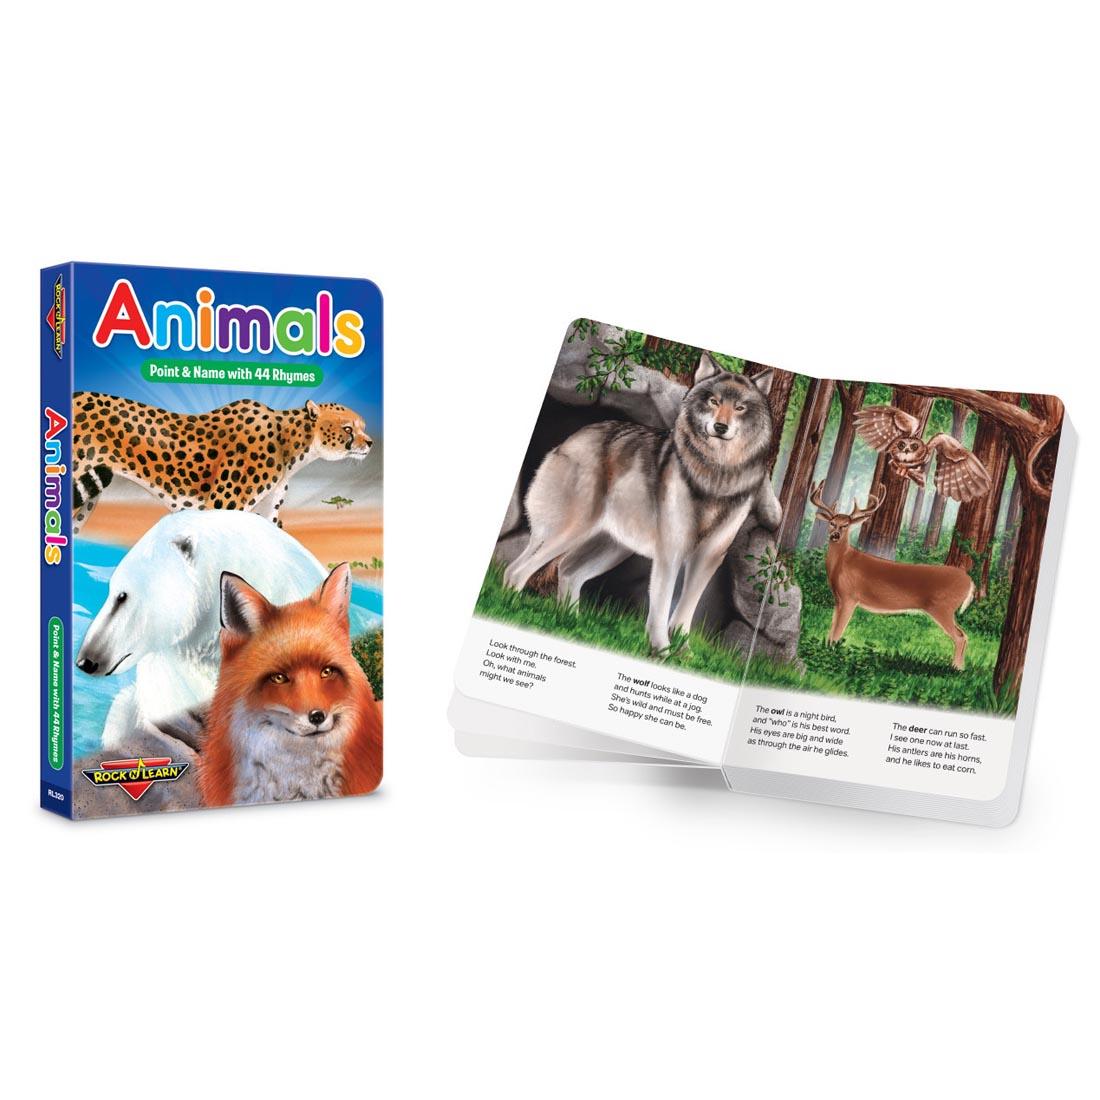 Animals Board Book shown both closed and open